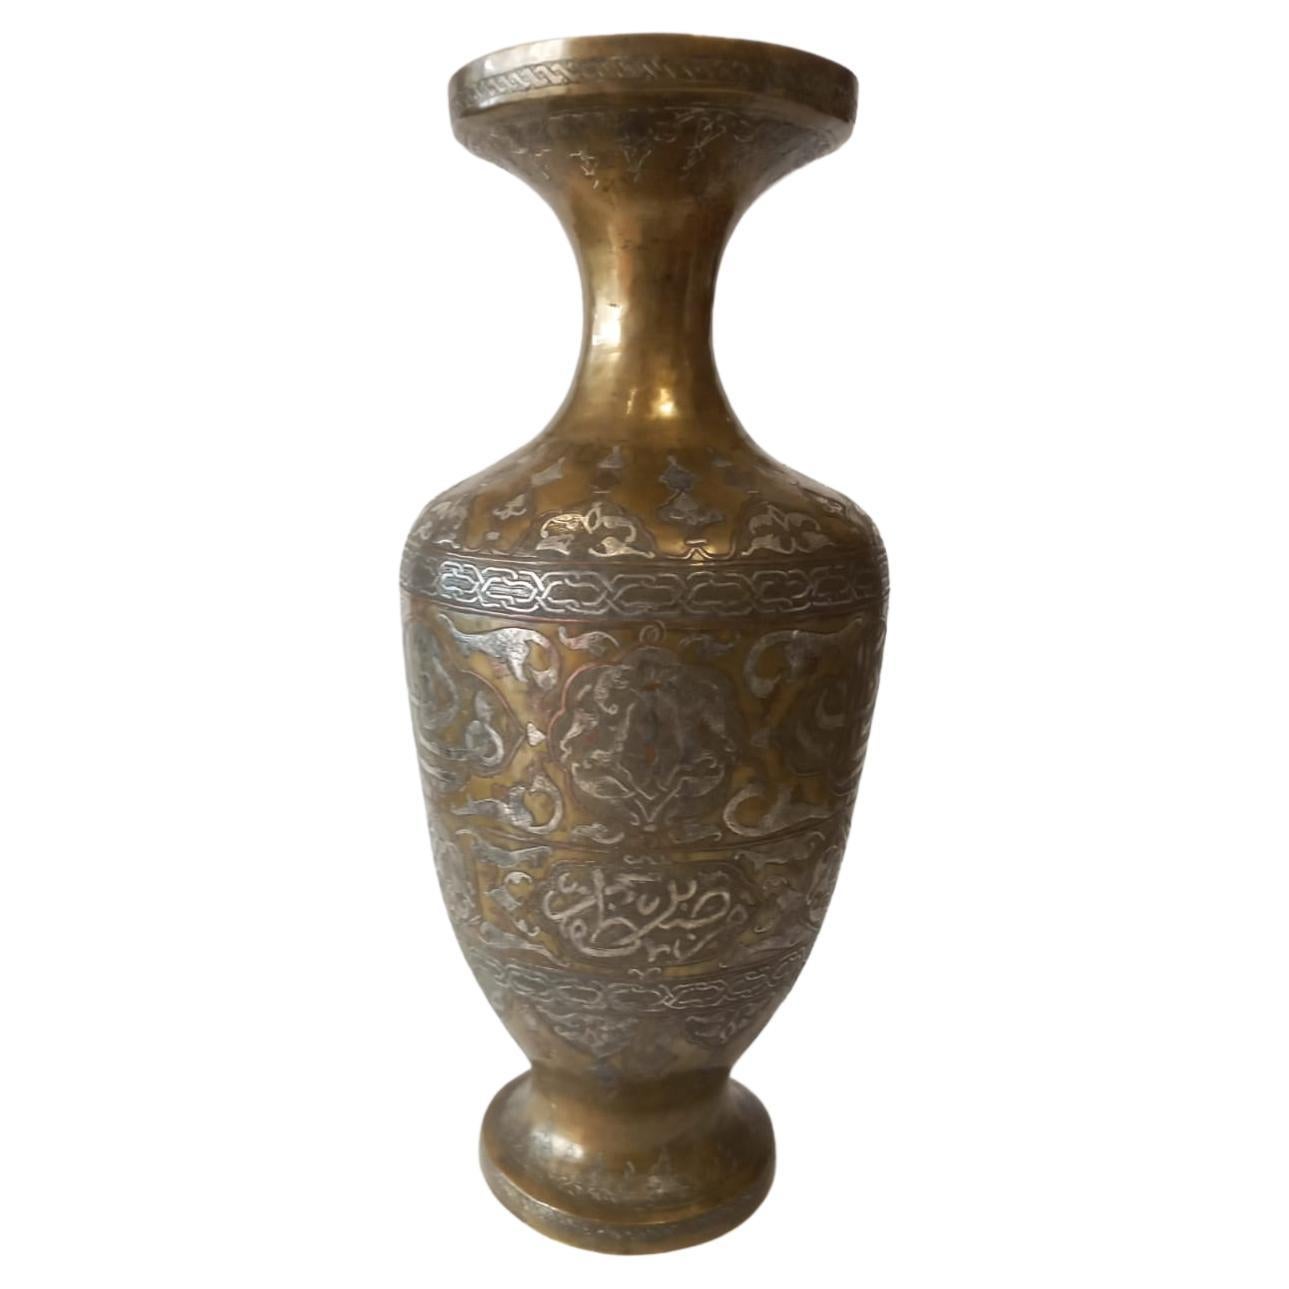 Antique Persian Islamic Brass Vase with Silver Inlay 19th Century